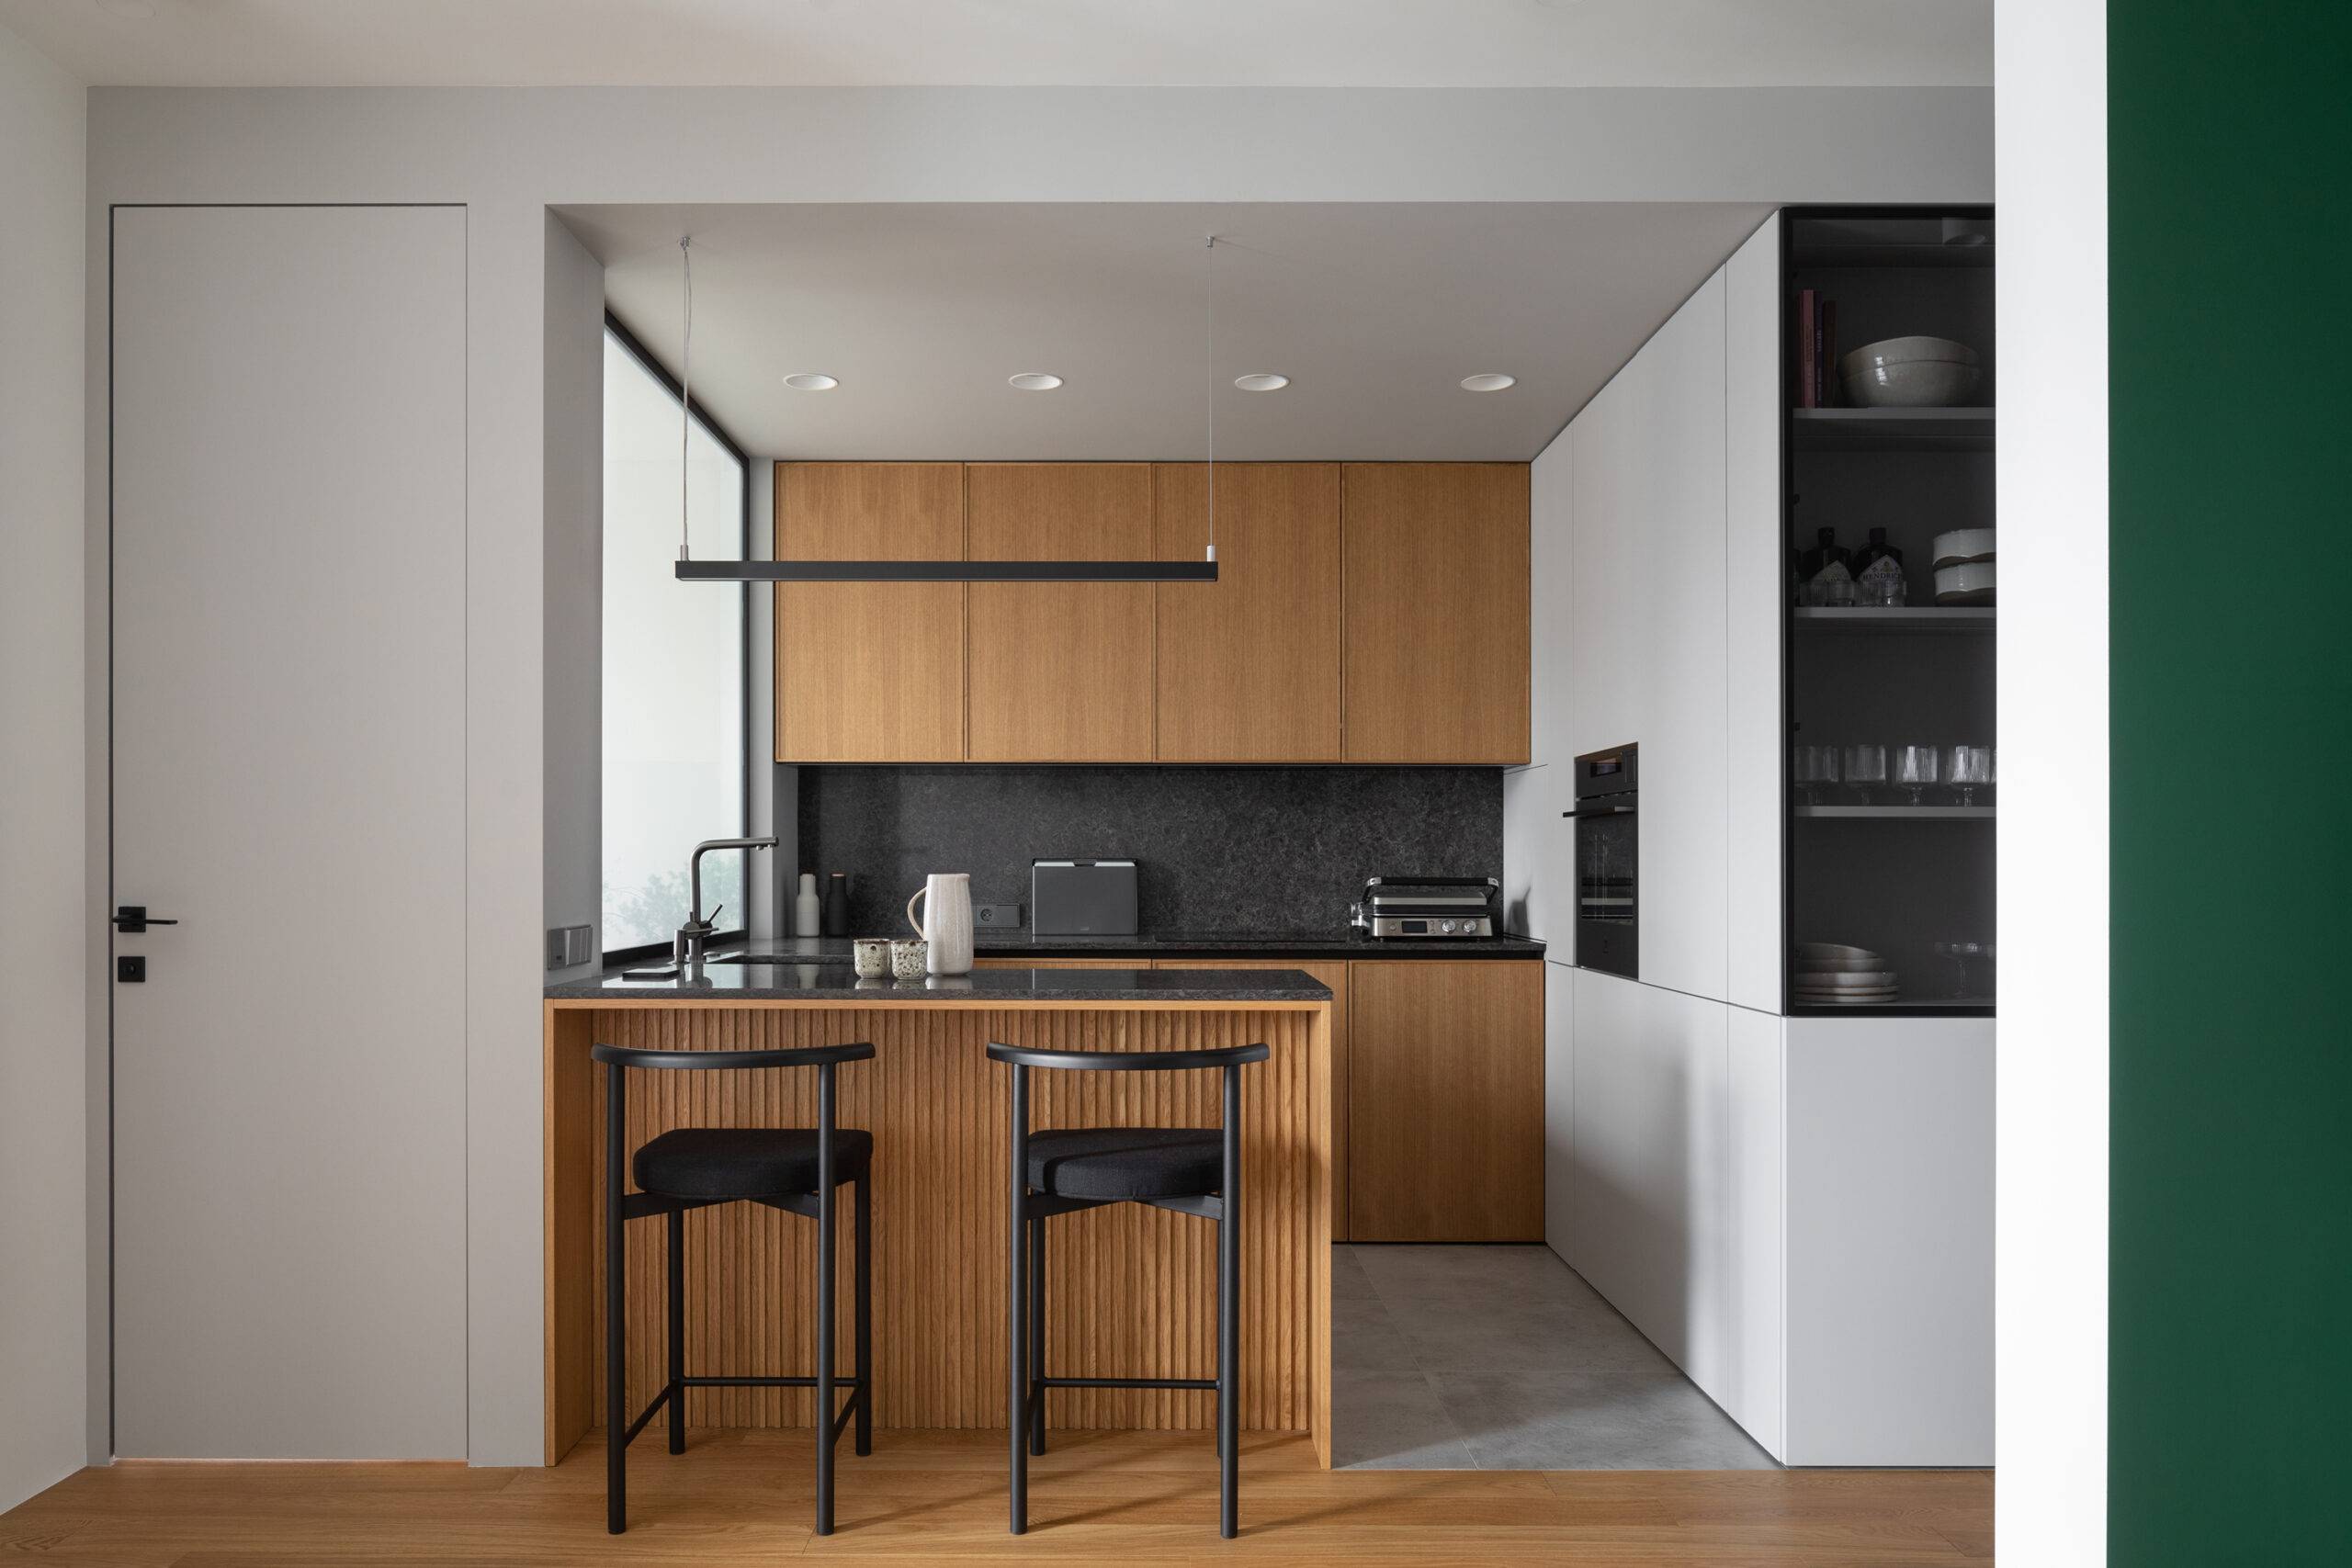 small kitchen with large exterior window over sink, dark wood cupboards and island, black countertops